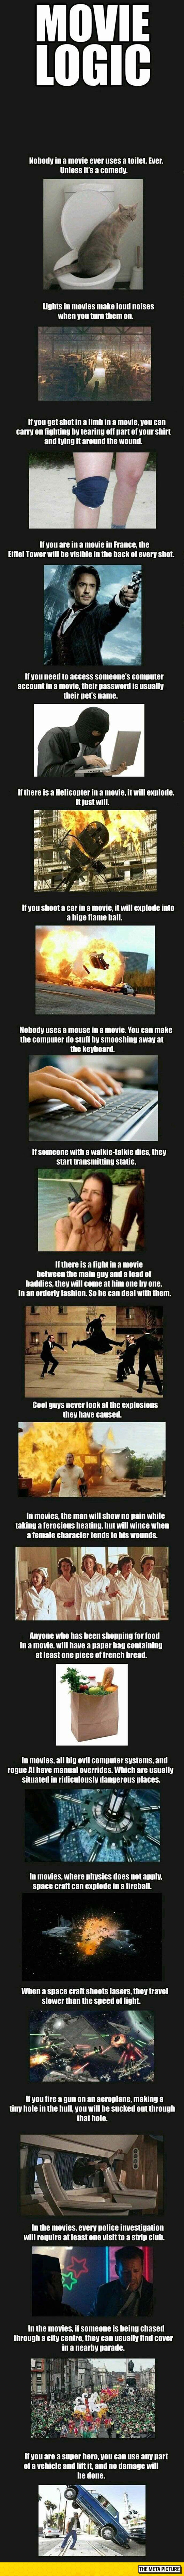 Strange Things That Only Happen In Movies